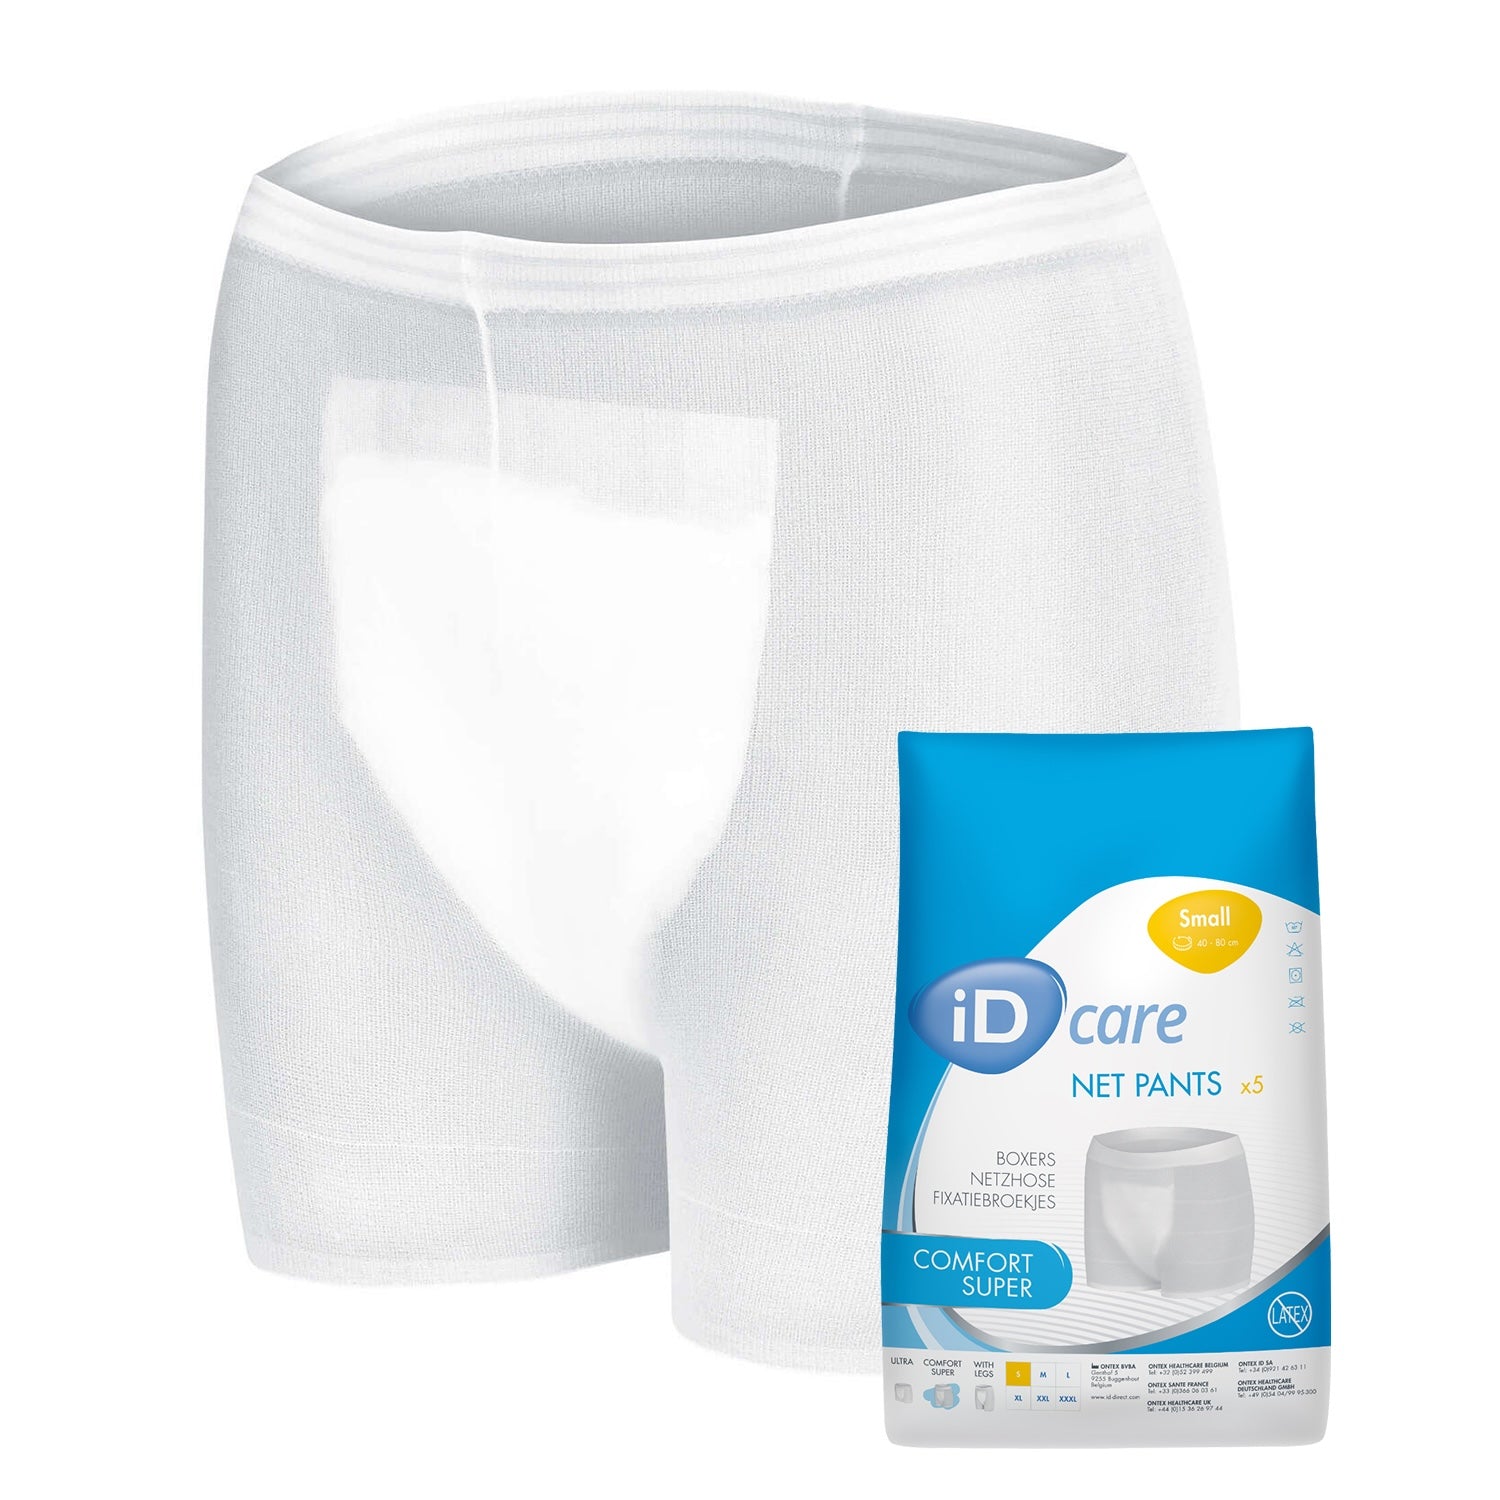 iD Care Net Pants Comfort Super | Small | Pack of 5 (3)